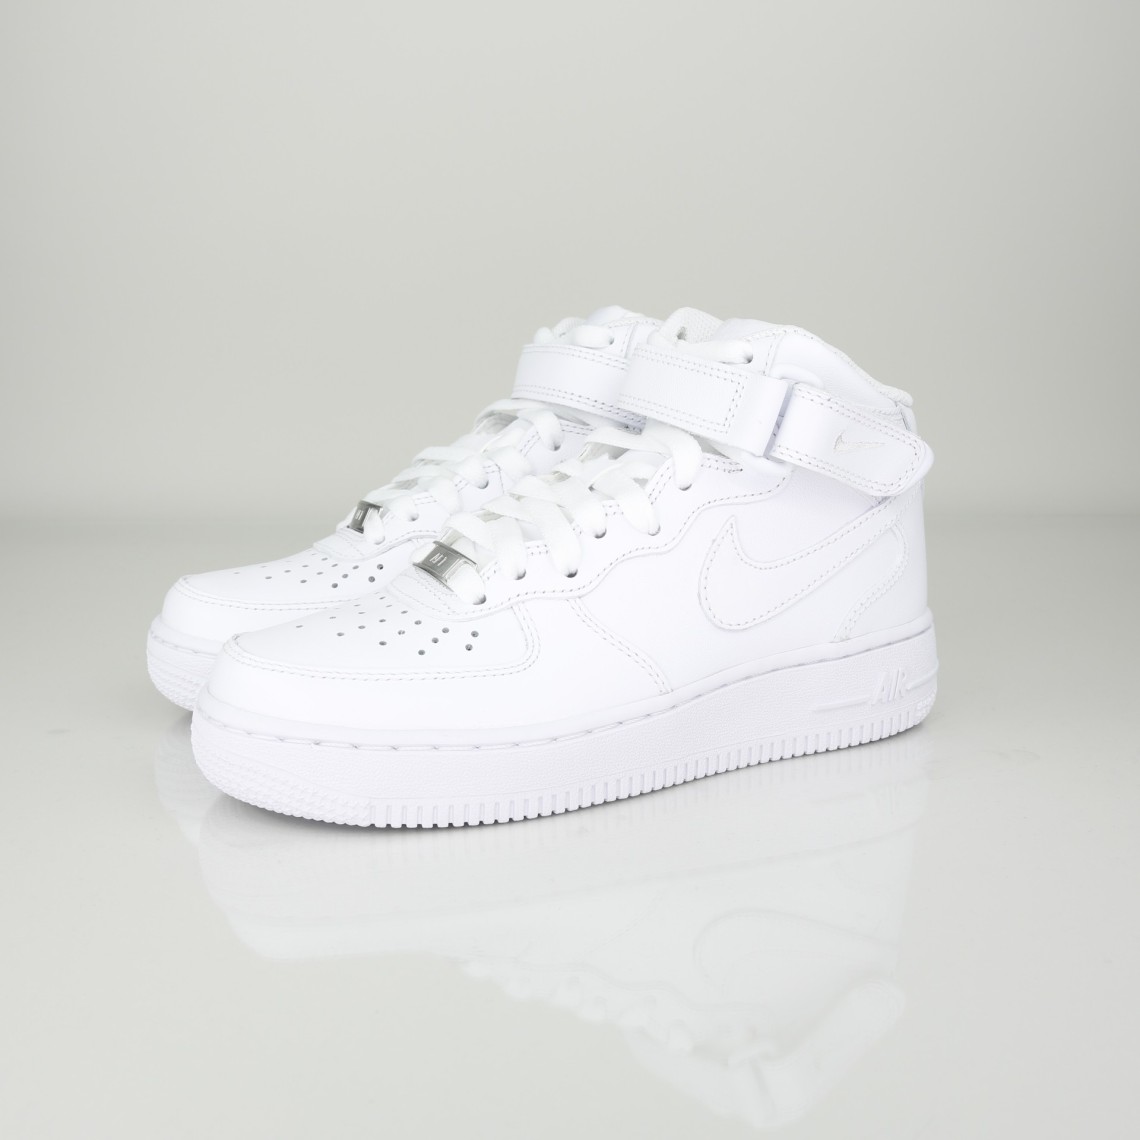 nike wmns air force 1 07 mid